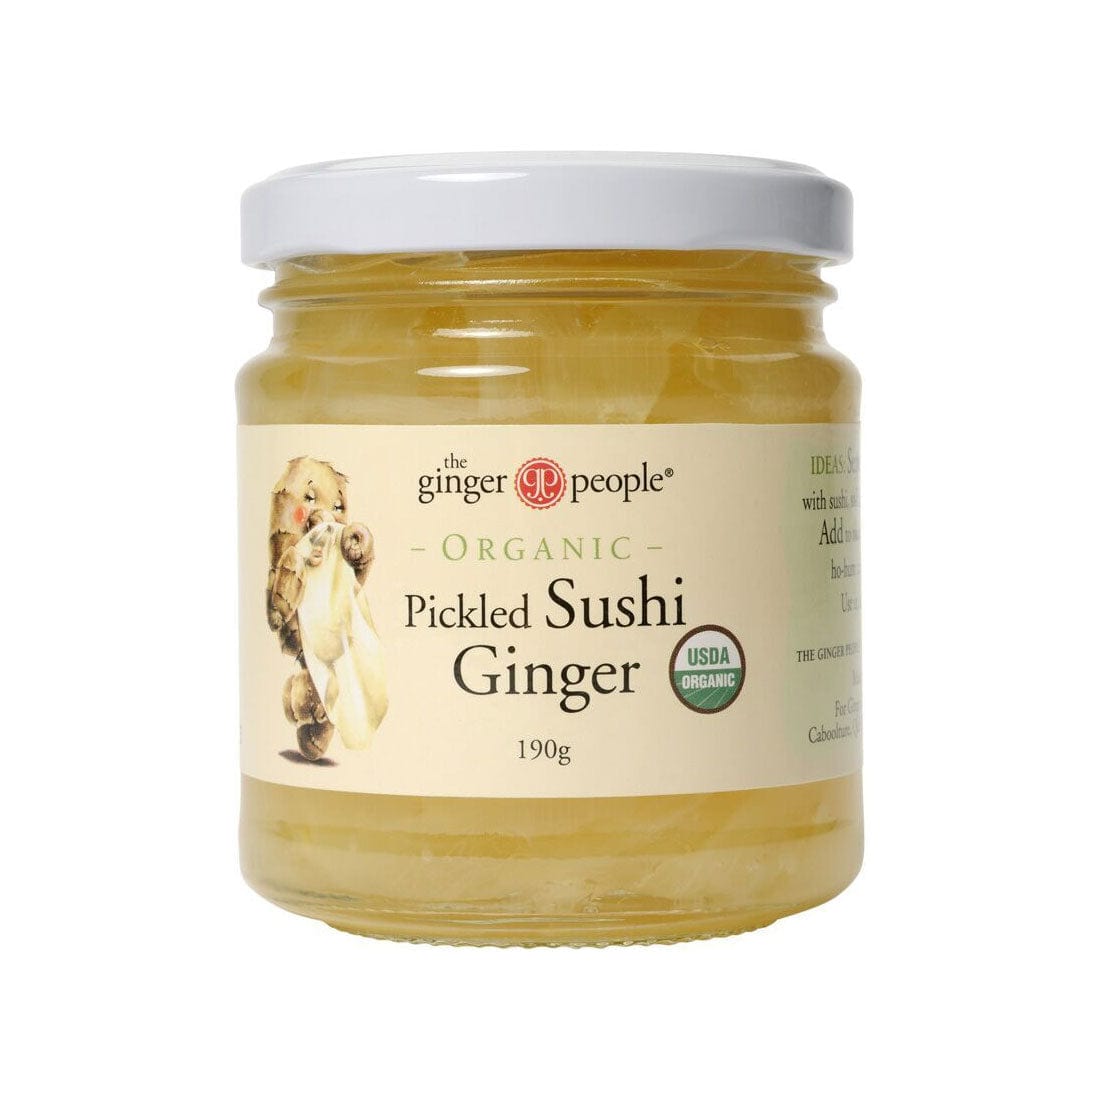 The Ginger People Pickled Sushi Ginger Organic 190g